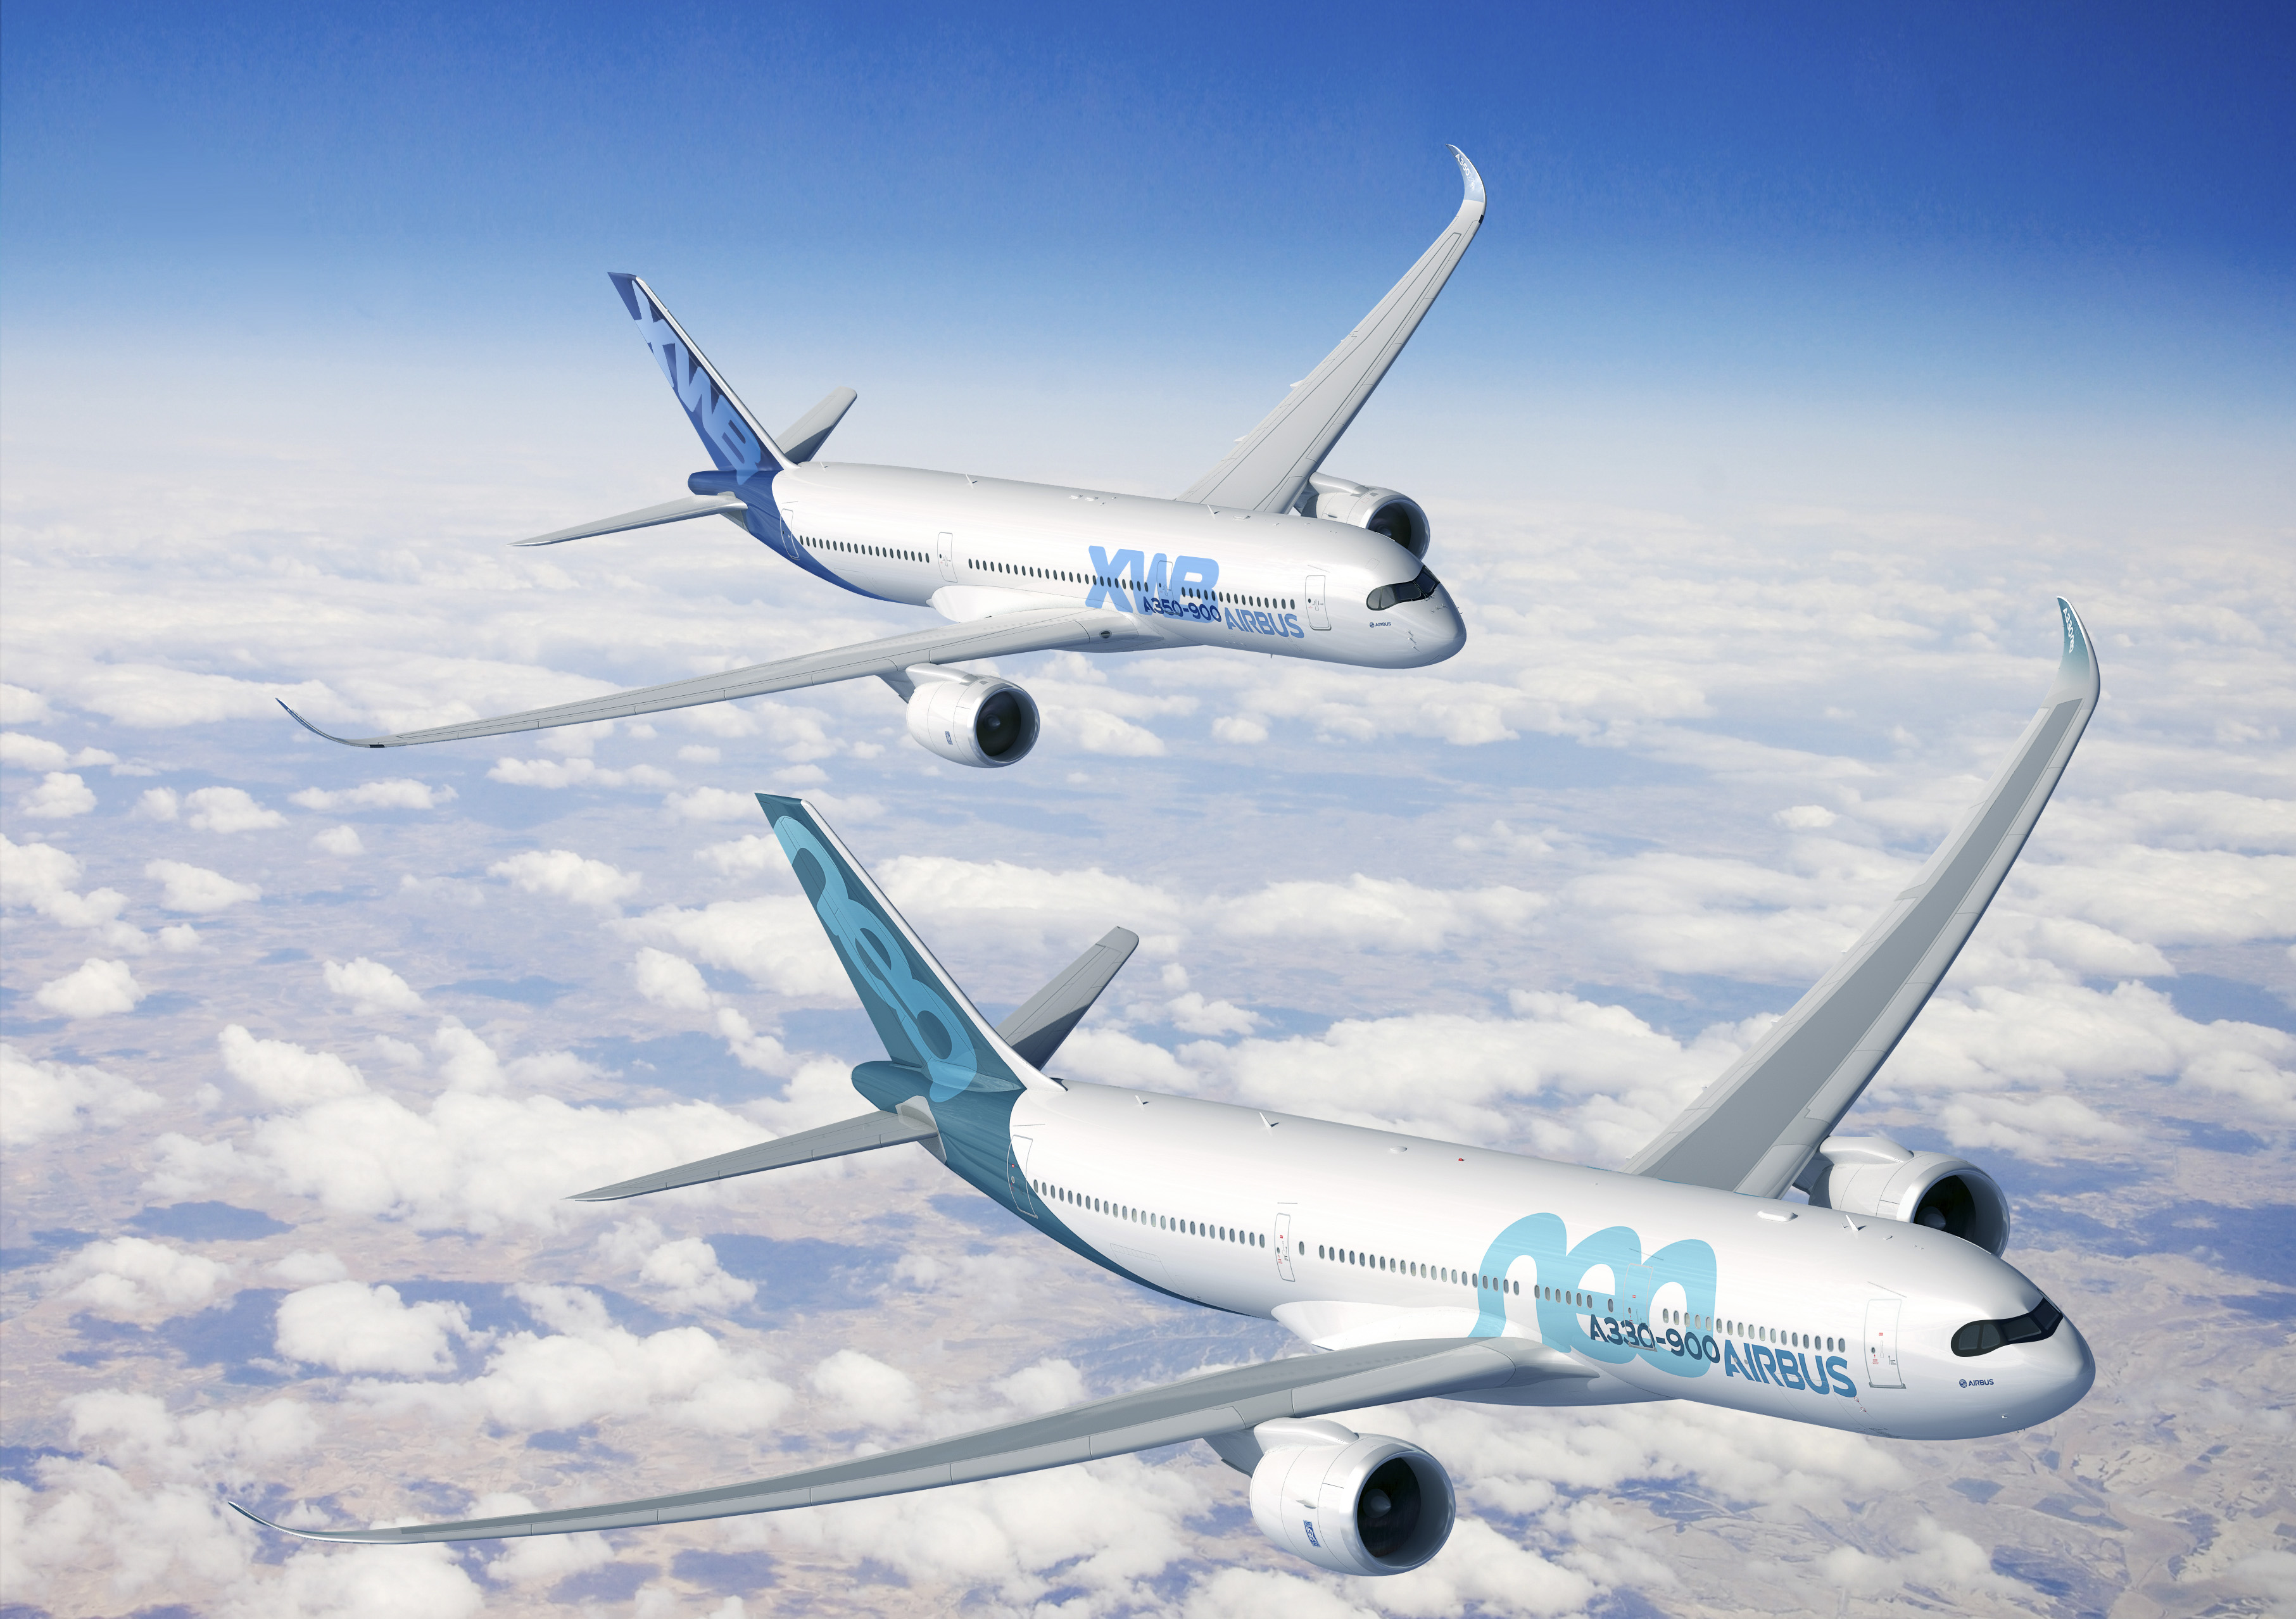 The year in review: Airbus’ 2015 highlights